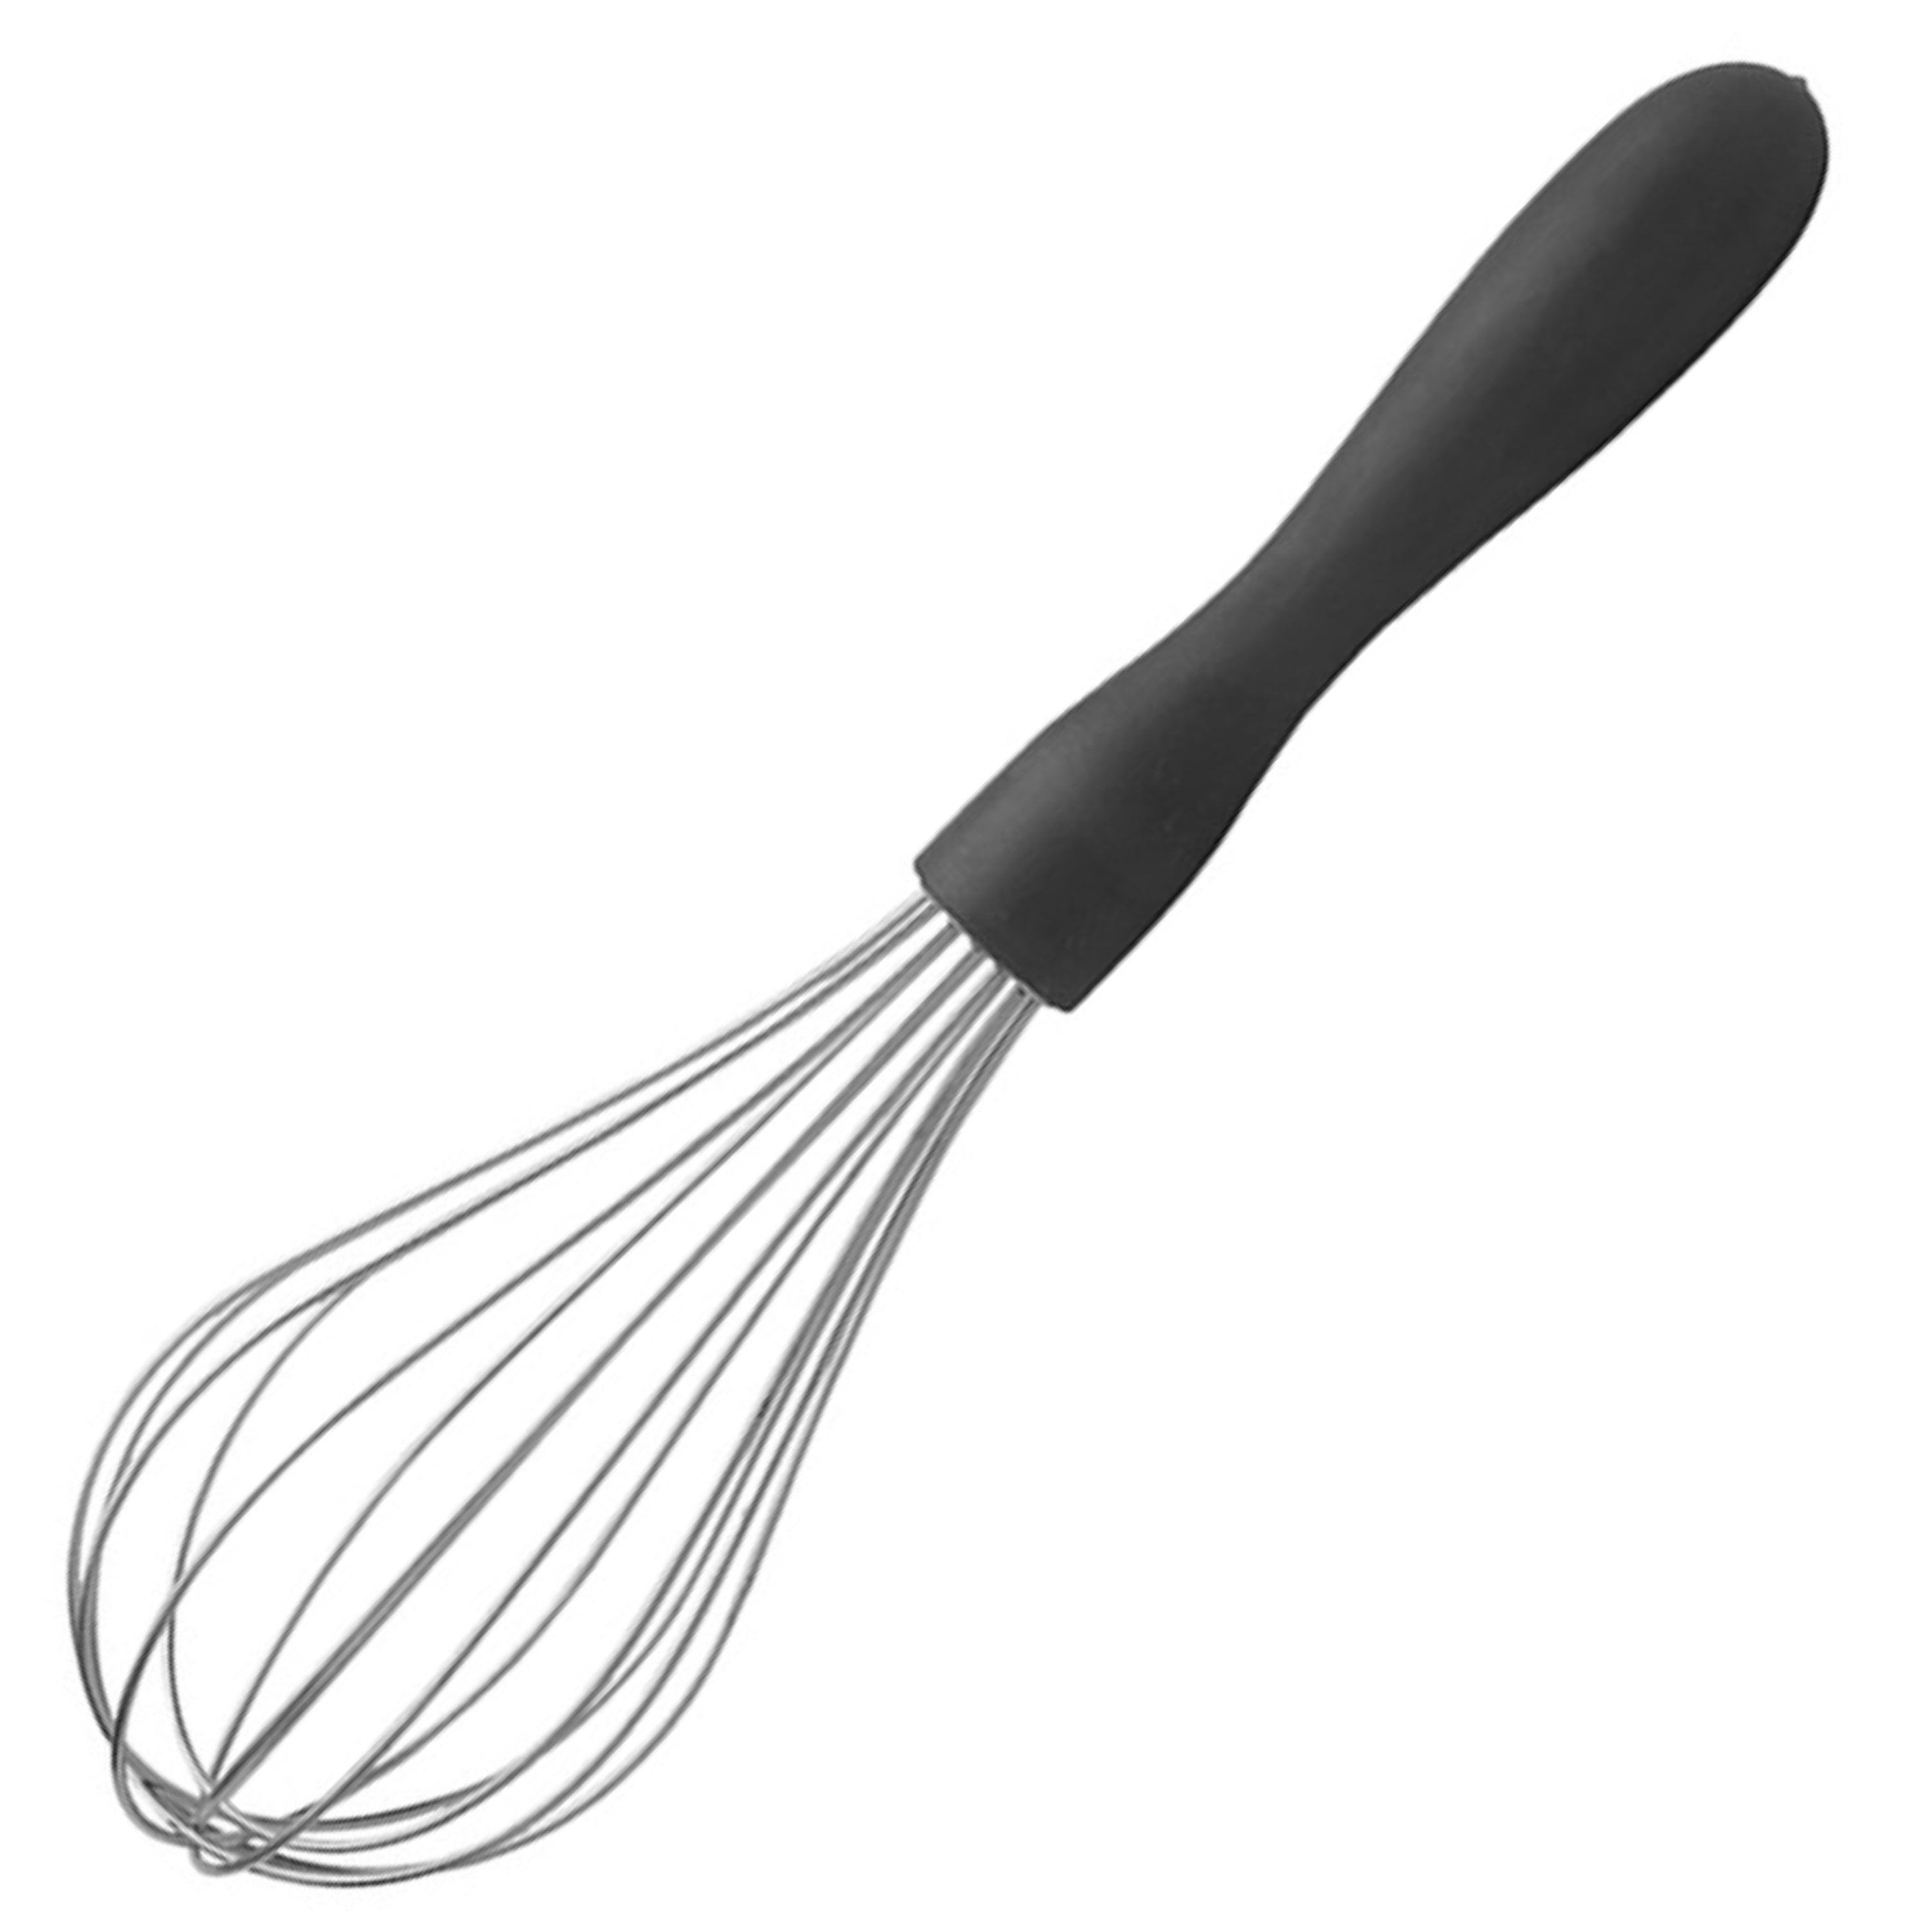 KOWS 1.4mm dolphin whisk (abs)(WK001)